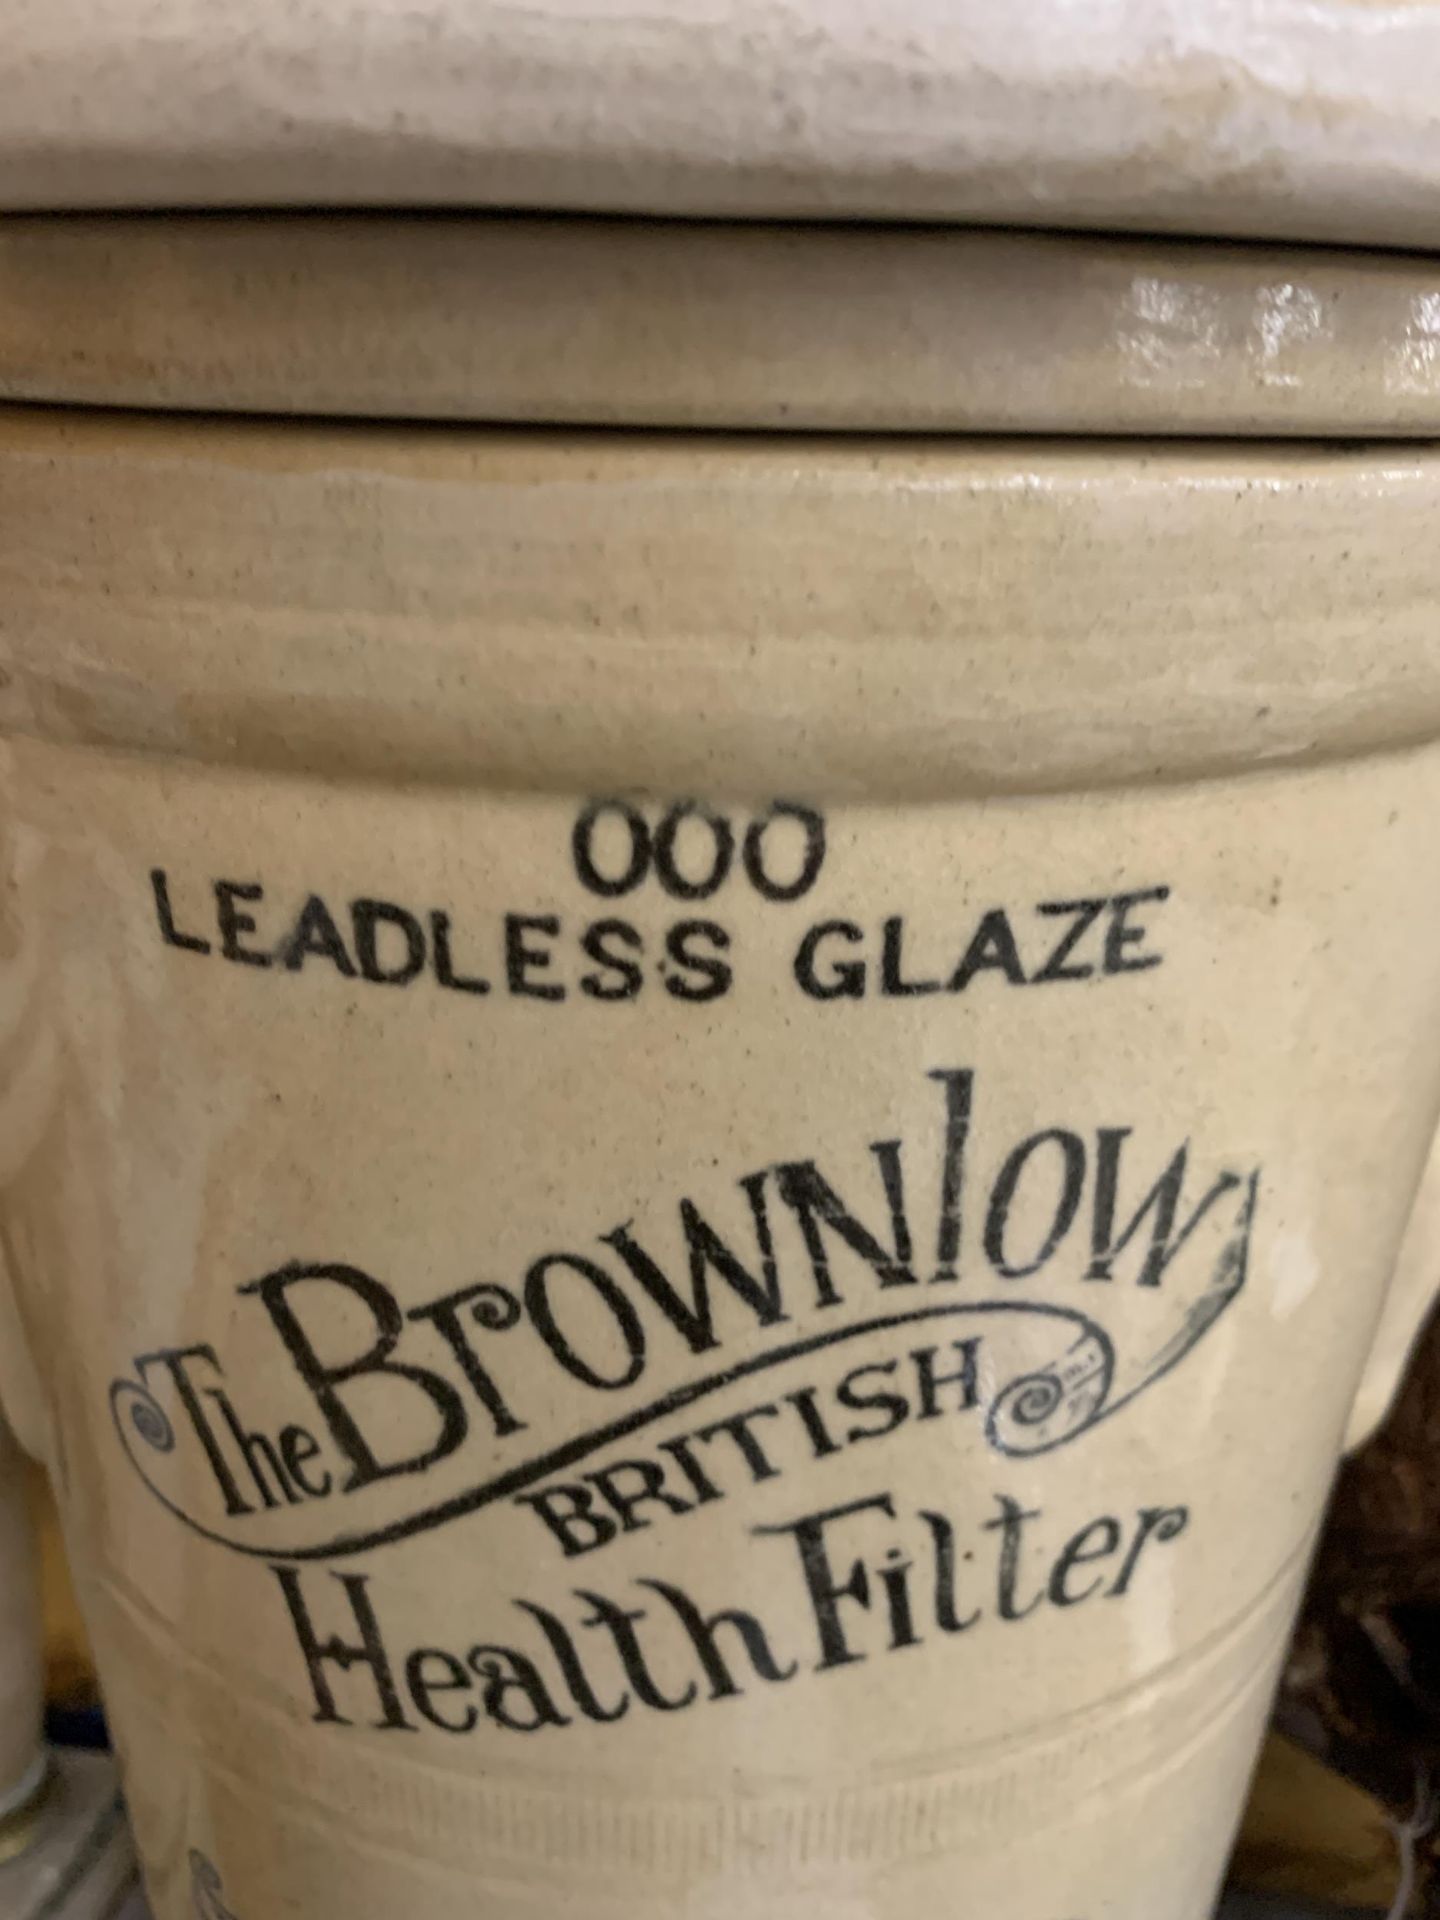 A VINTAGE 'THE BROWNLOW BRITISH HEALTH' WATER FILTER MARKED LONDON AND TONBRIDGE PURE DRINING - Image 2 of 5